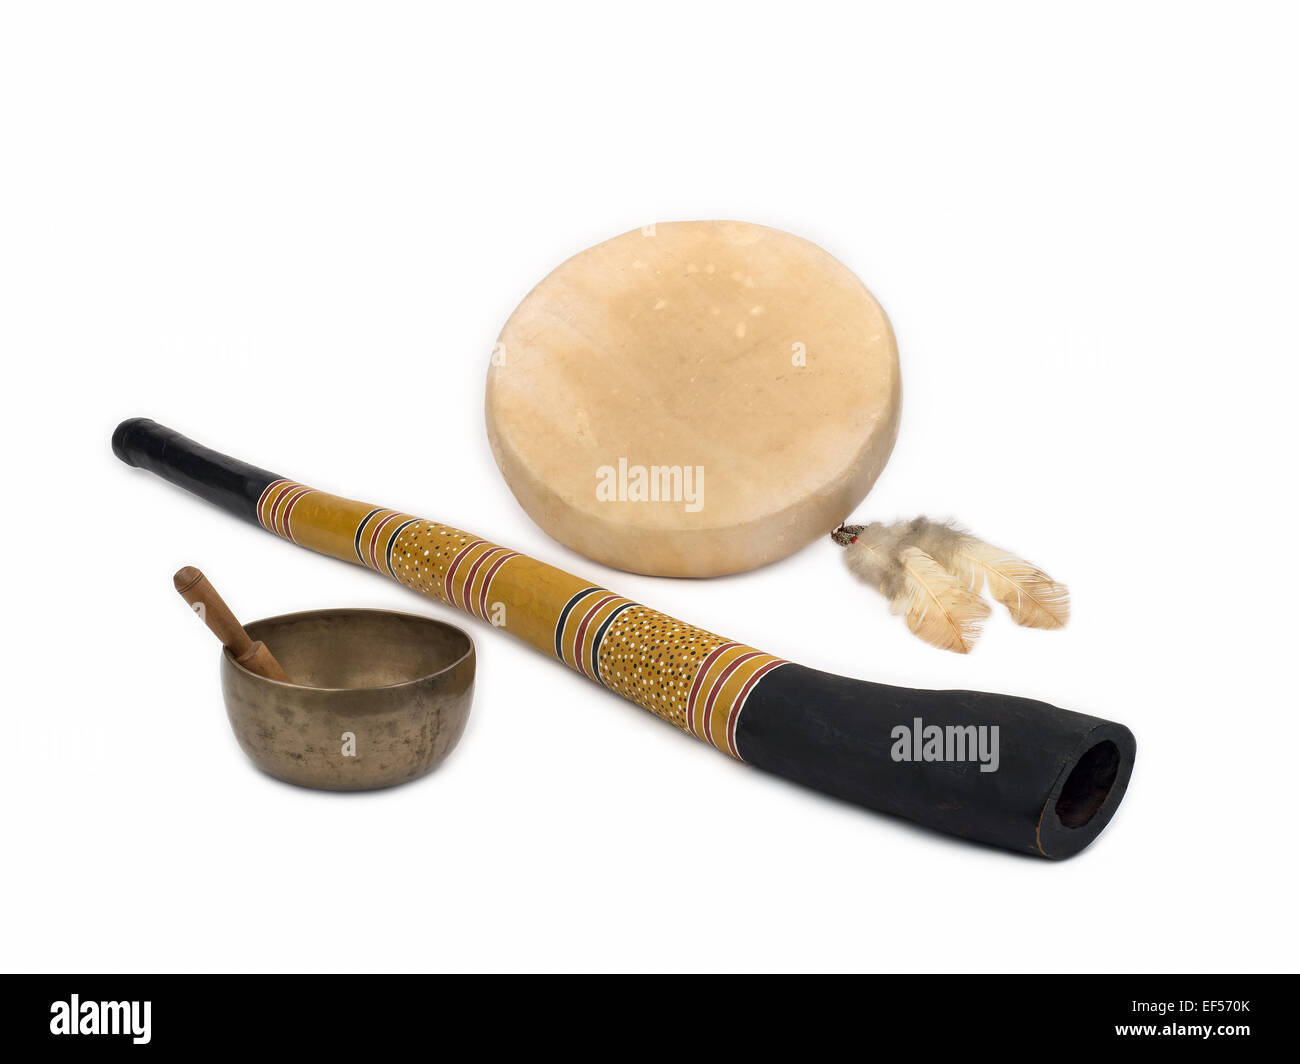 Sound Healing Instruments - Didgeridoo, Native American Drum with Feathers, and Tibetan Singing Bowl. Stock Photo